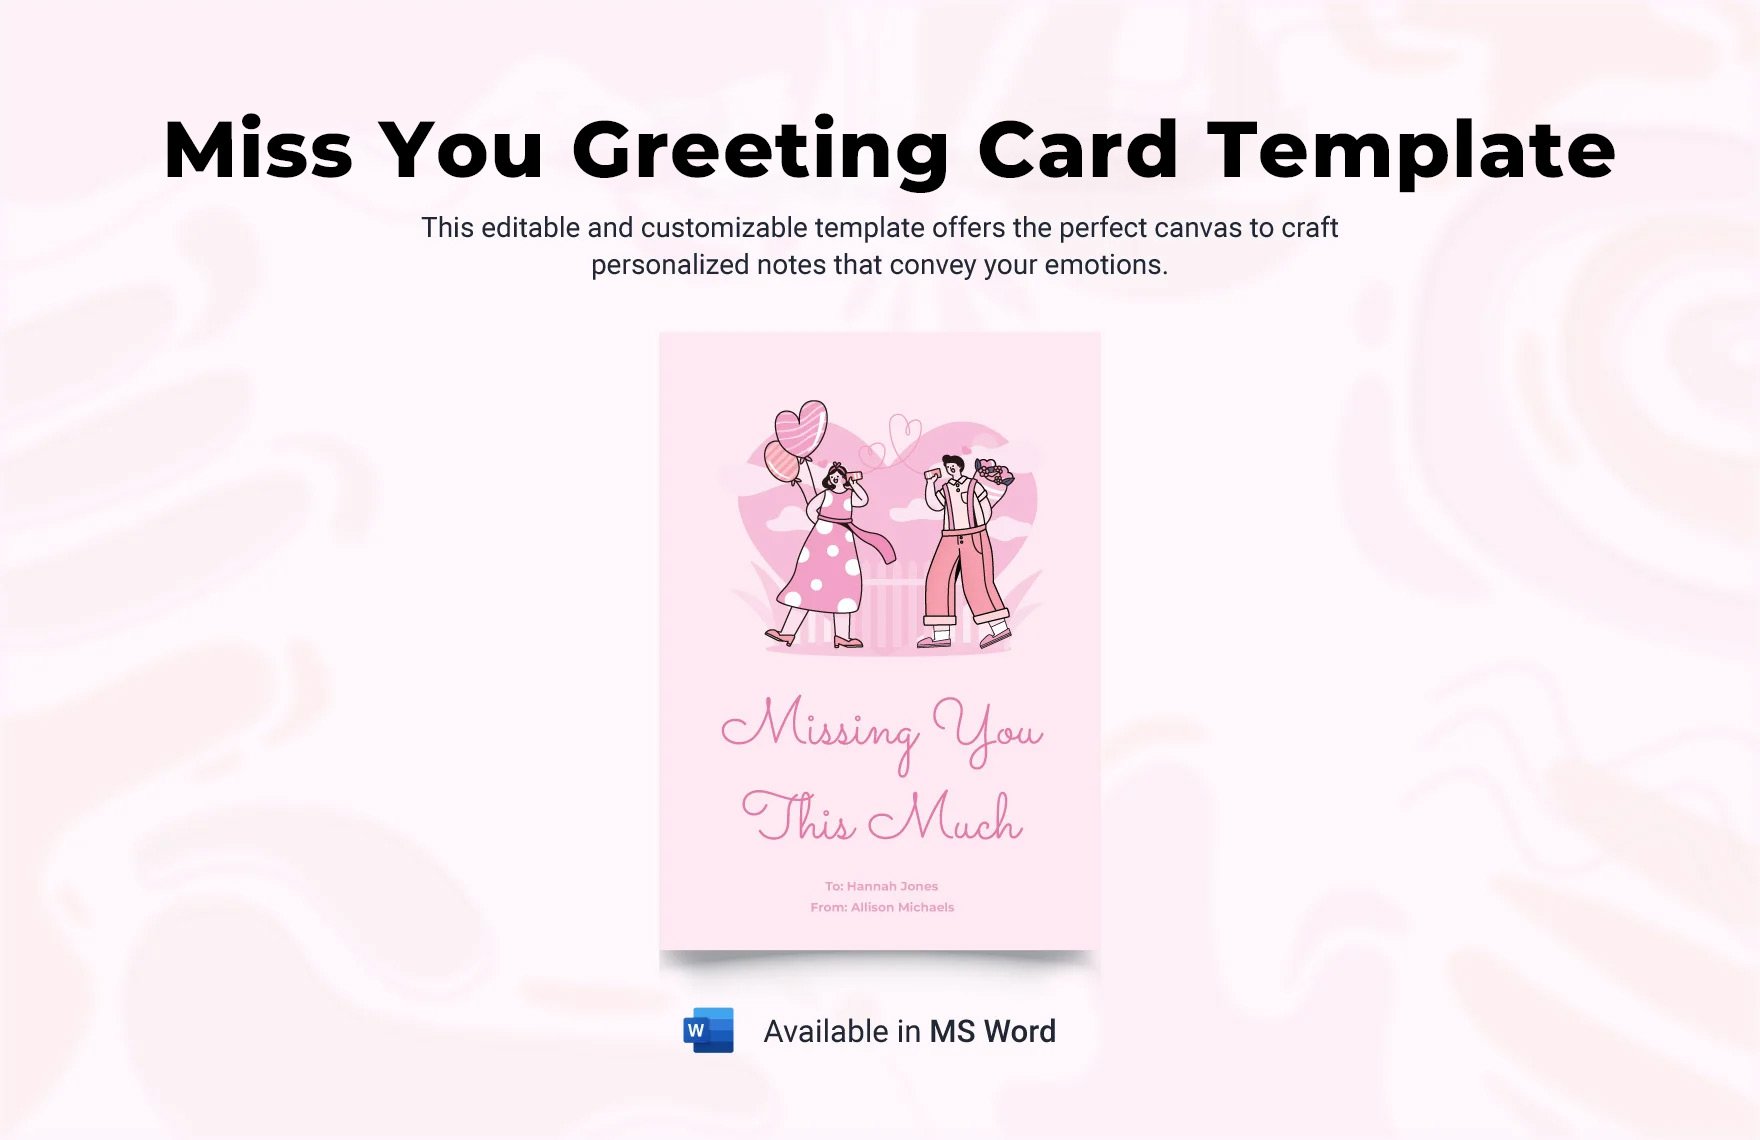 Miss You Greeting Card Template